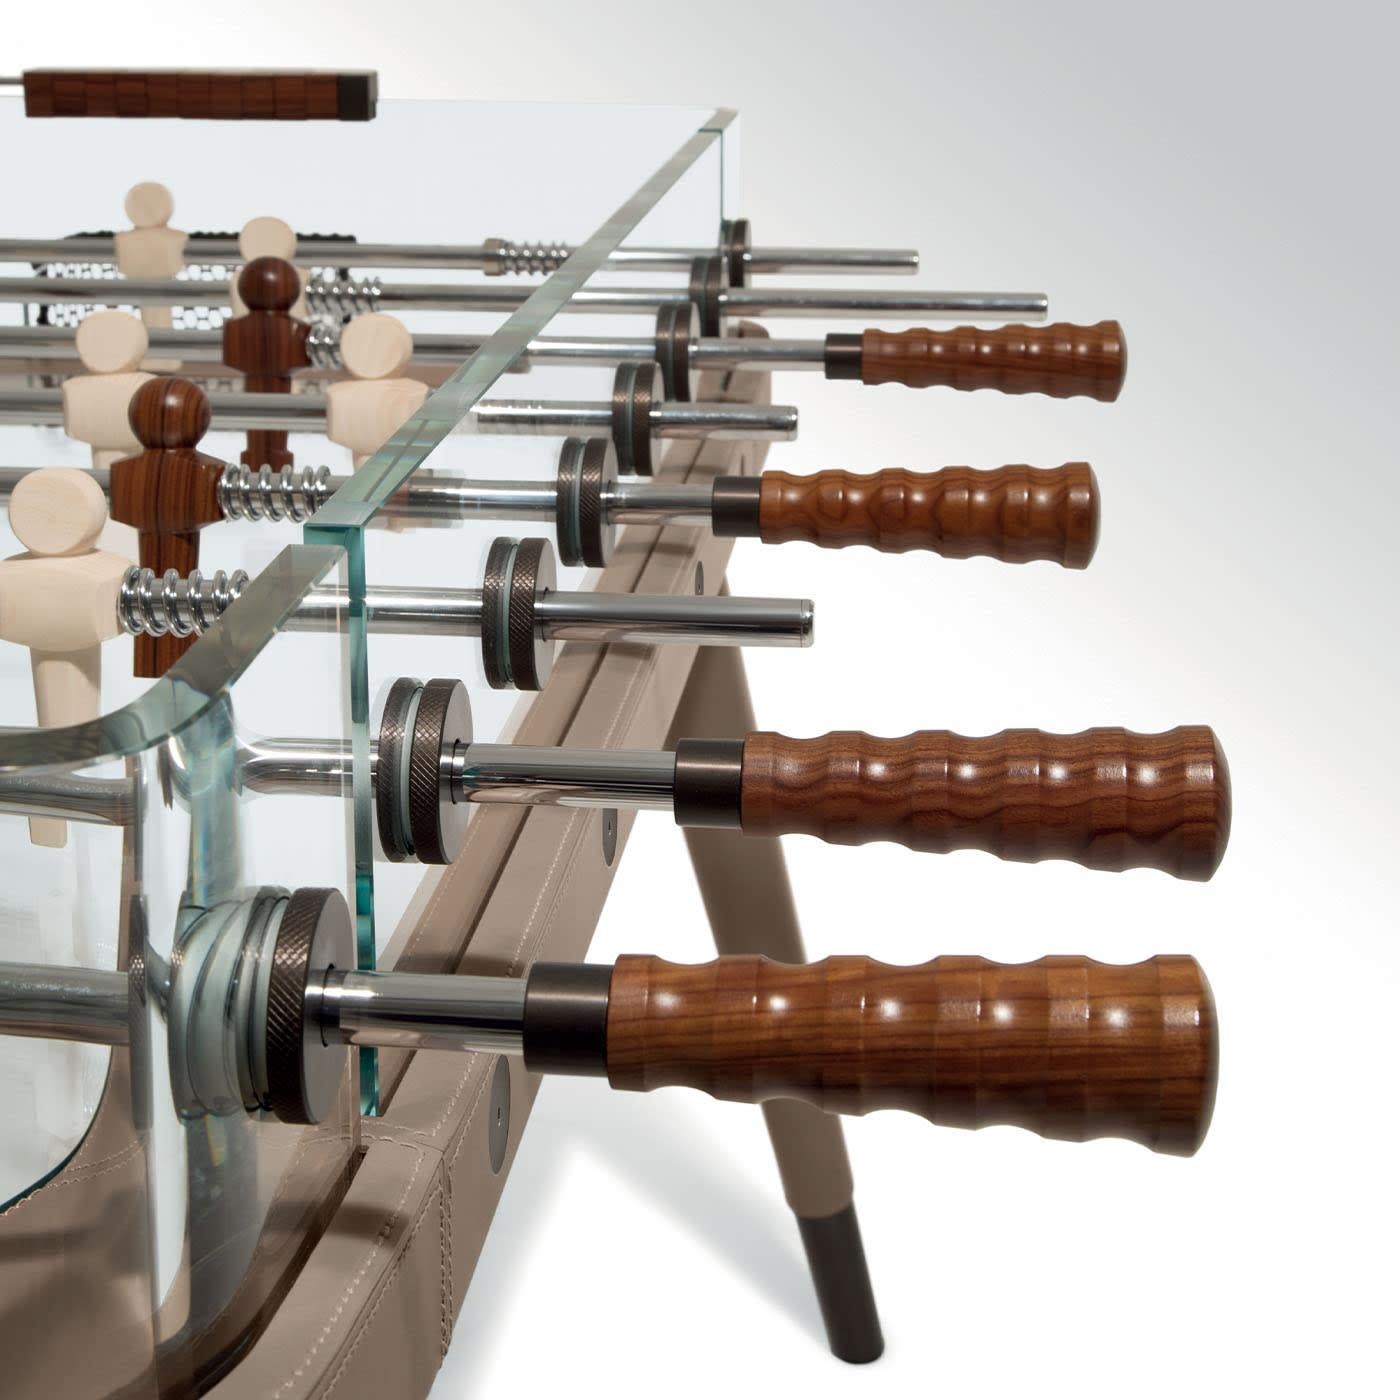 Discover this table football with tub and curved sides made of extra-clear glass. This unique table soccer features wooden legs and frame, covered in leather. The knobs are made of pau ferro and the players are made of pau iron and ash